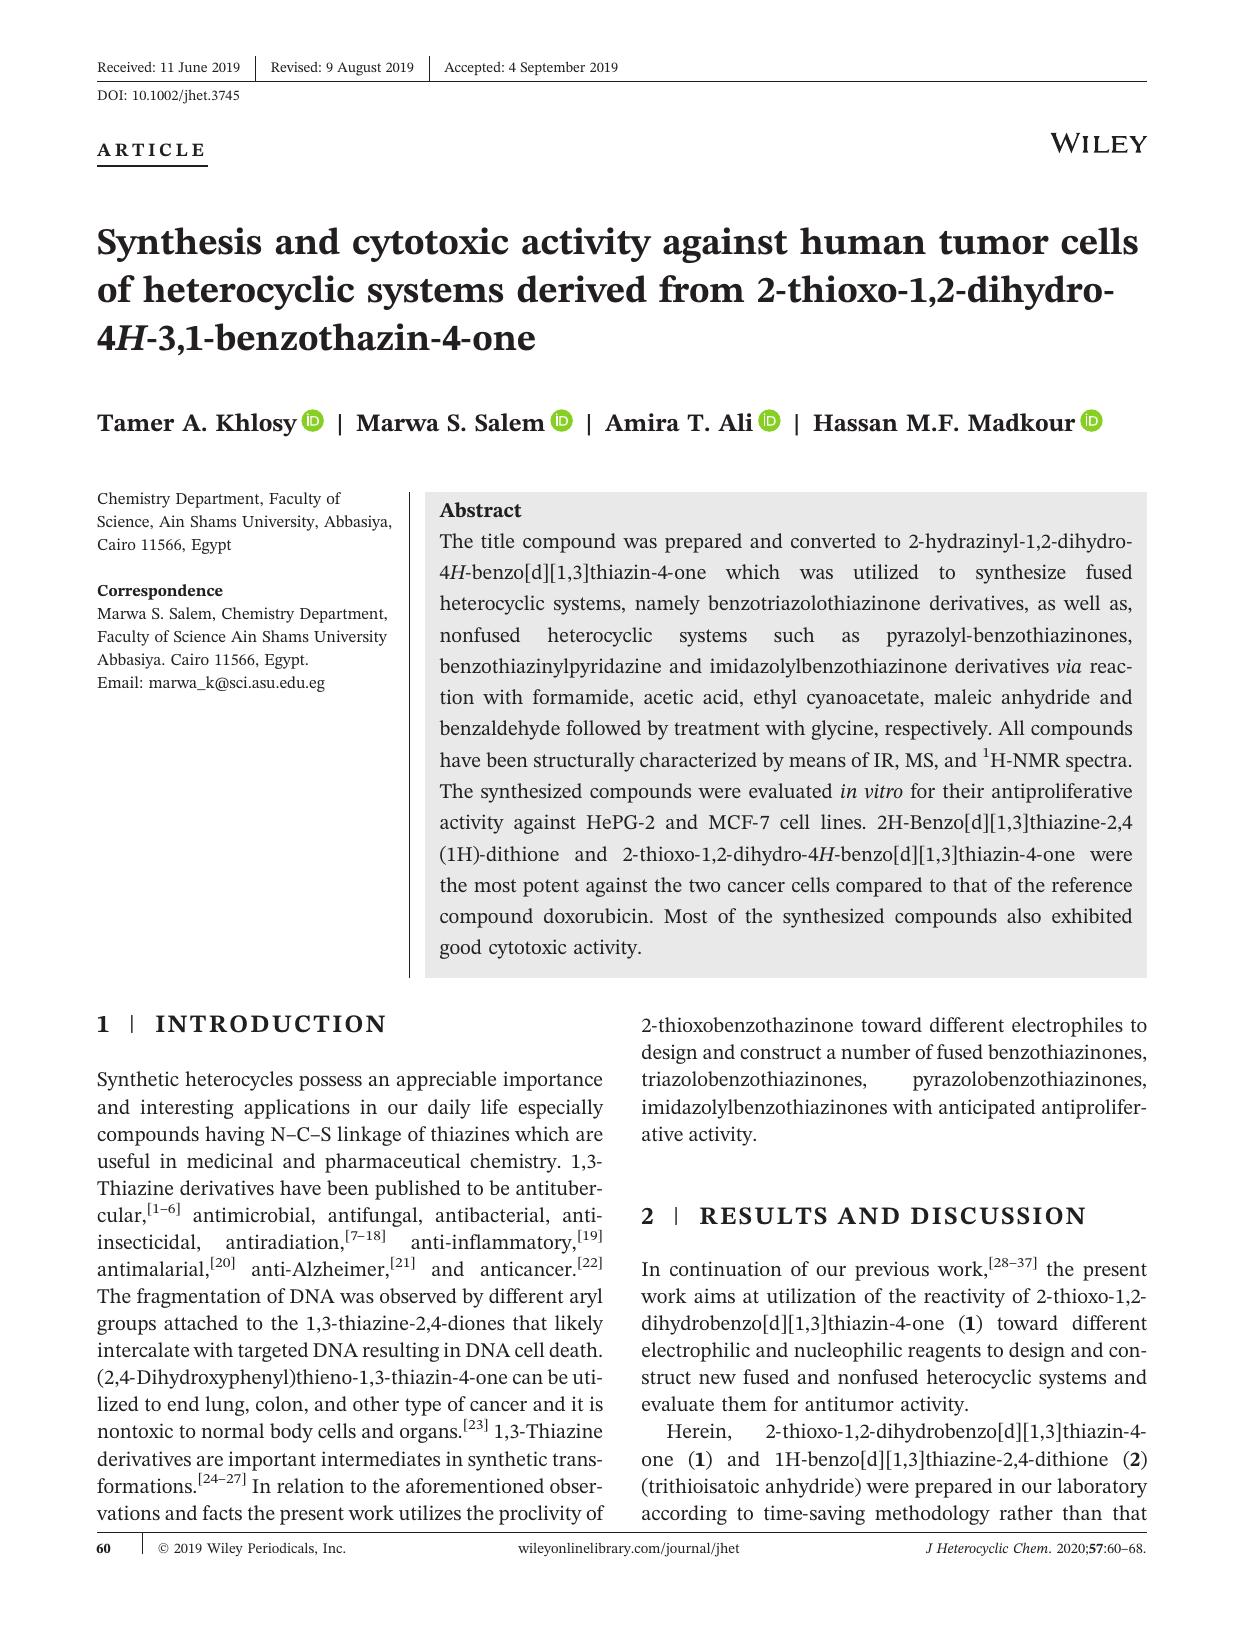 Synthesis and cytotoxic activity against human tumor cells of heterocyclic systems derived from 2âthioxoâ1,2âdihydroâ4Hâ3,1âbenzothazinâ4âone by Tamer A. Khlosy Marwa S. Salem Amira T. Ali Hassan M.F. Madkour